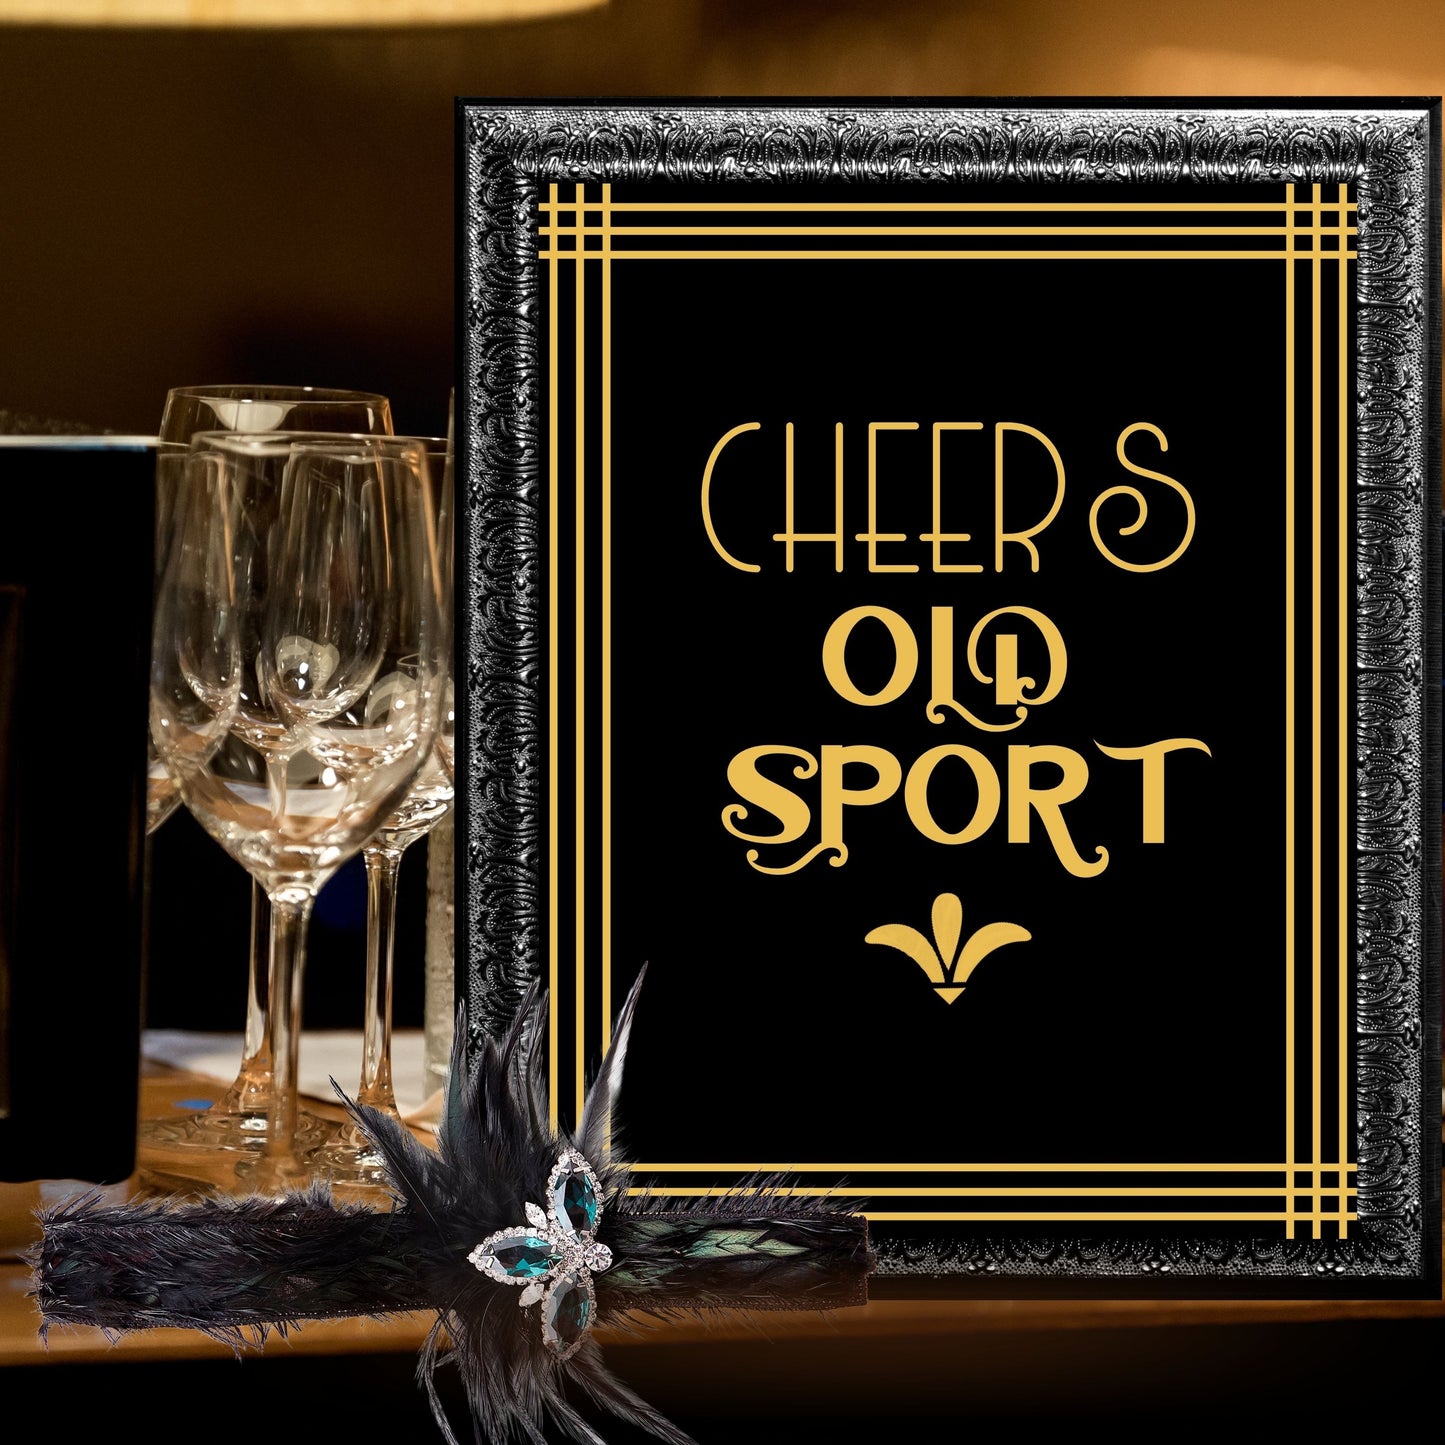 "Cheers Old Sport" Printable Party Sign For Great Gatsby or Roaring 20's Party Or Wedding, Black & Gold, Printable Party Decor